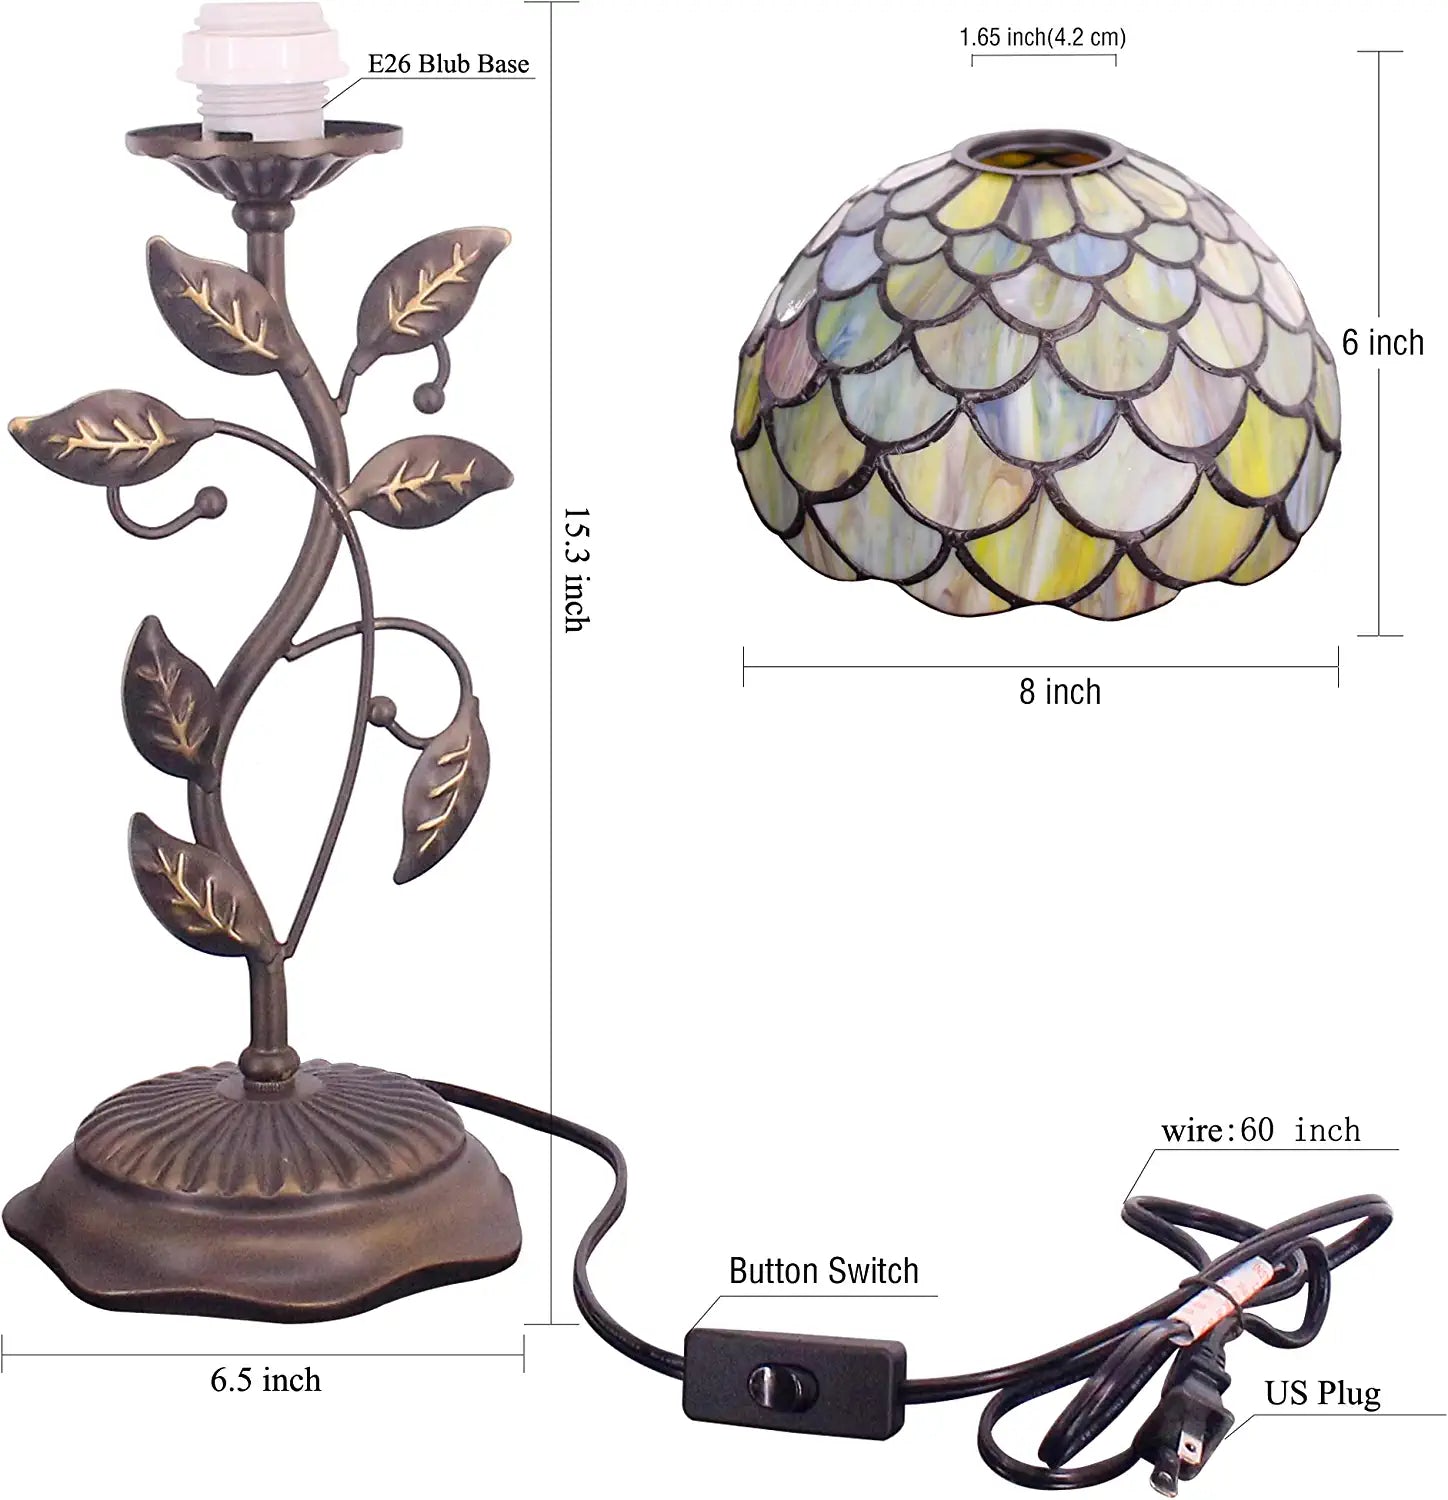 WERFACTORY Small Tiffany Table Lamp 8" Stained Glass Fish Scales Style Shade 19" Tall Antique Vintage Metal Leaf Base Mini Bedside Accent Desk Torchiere Uplight